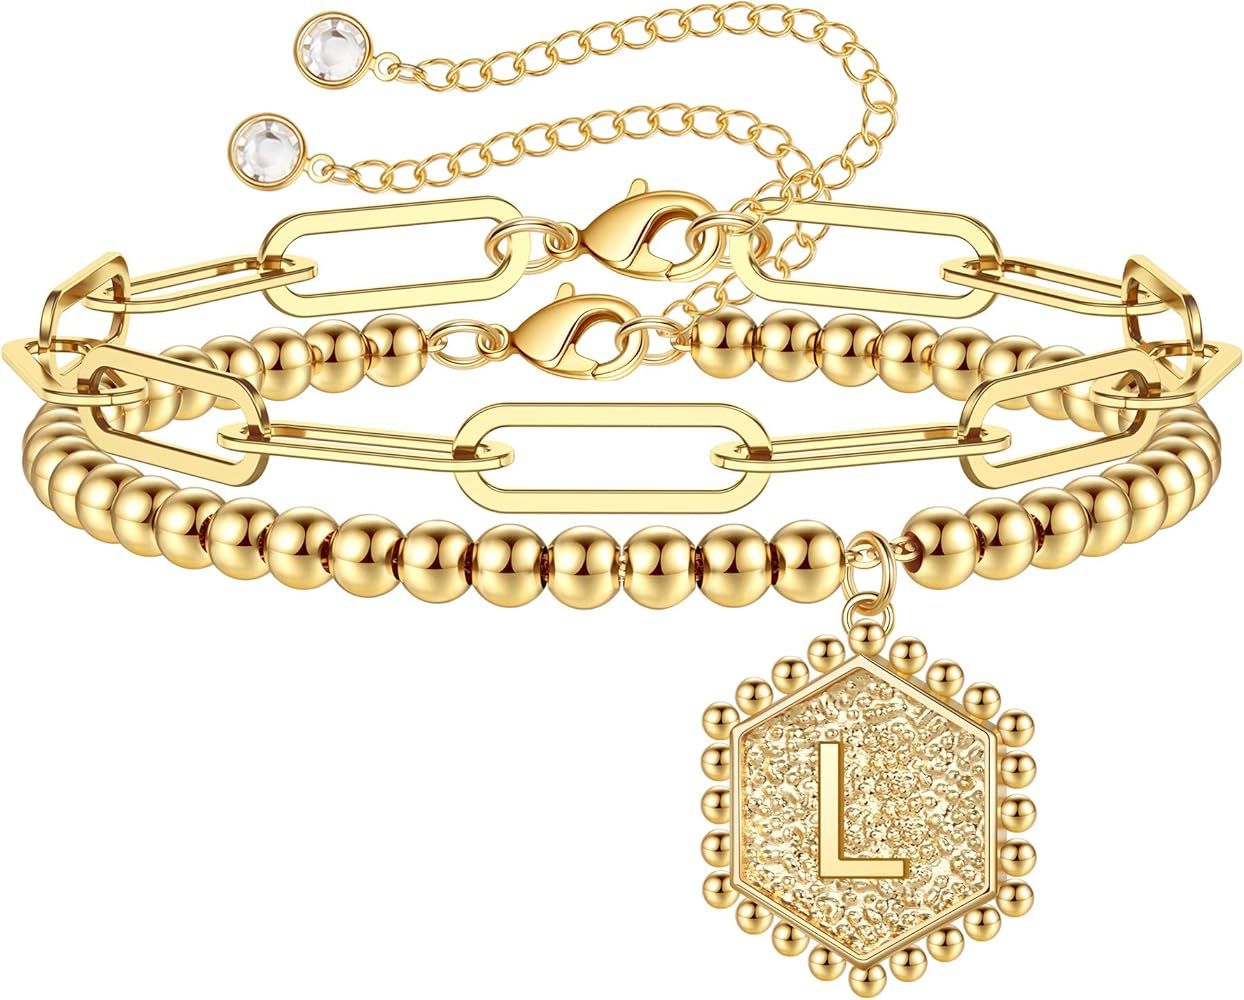 Gold Initial Bracelets for Women, 14K Gold Plated Beaded Bracelets for Women Teen Girls Hexagon Pend | Amazon (US)